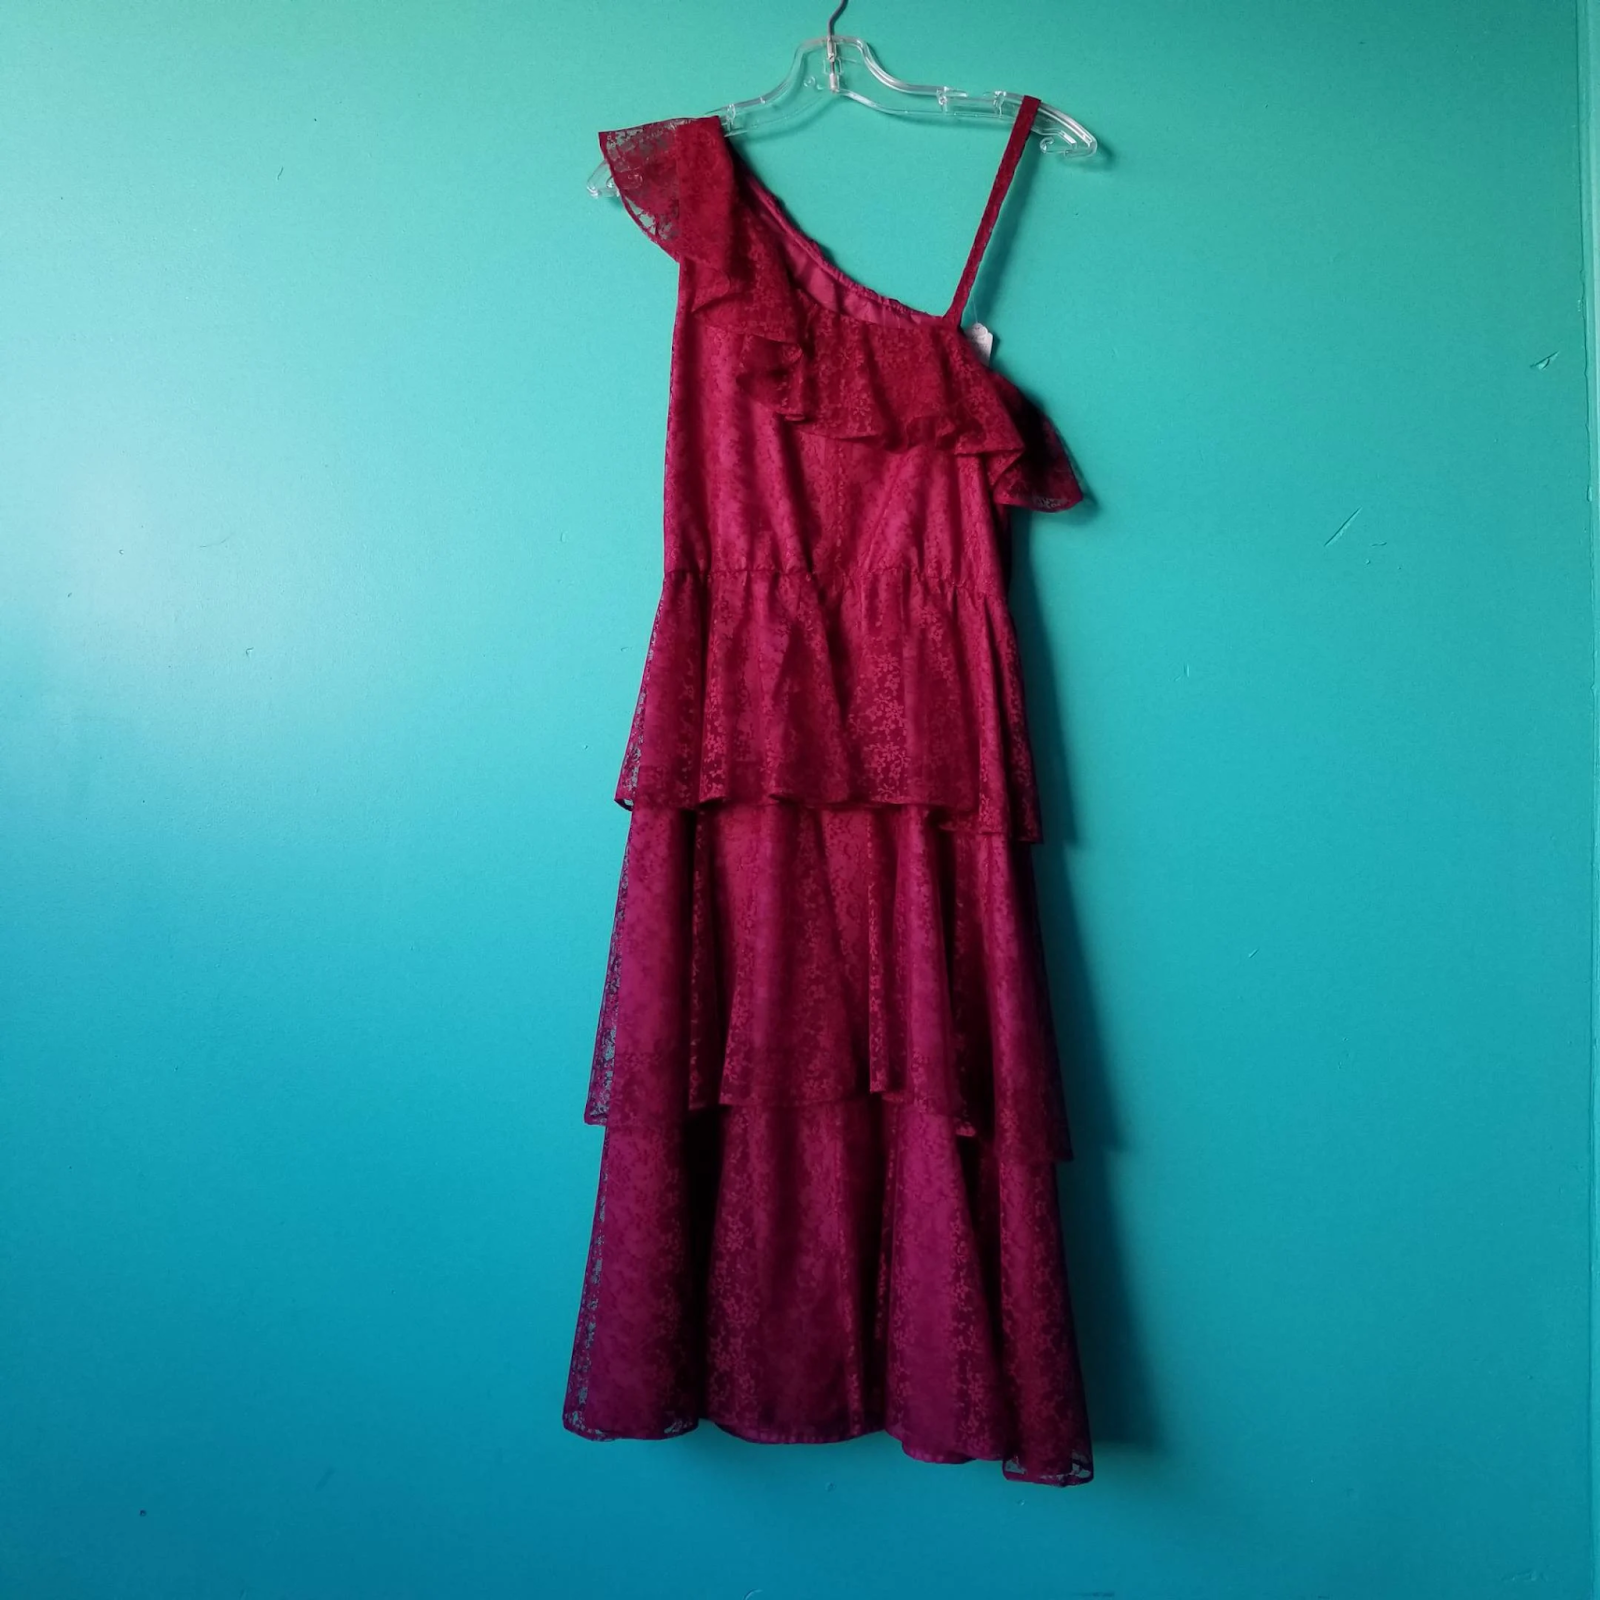 A purple dress hanging on a green background wall.